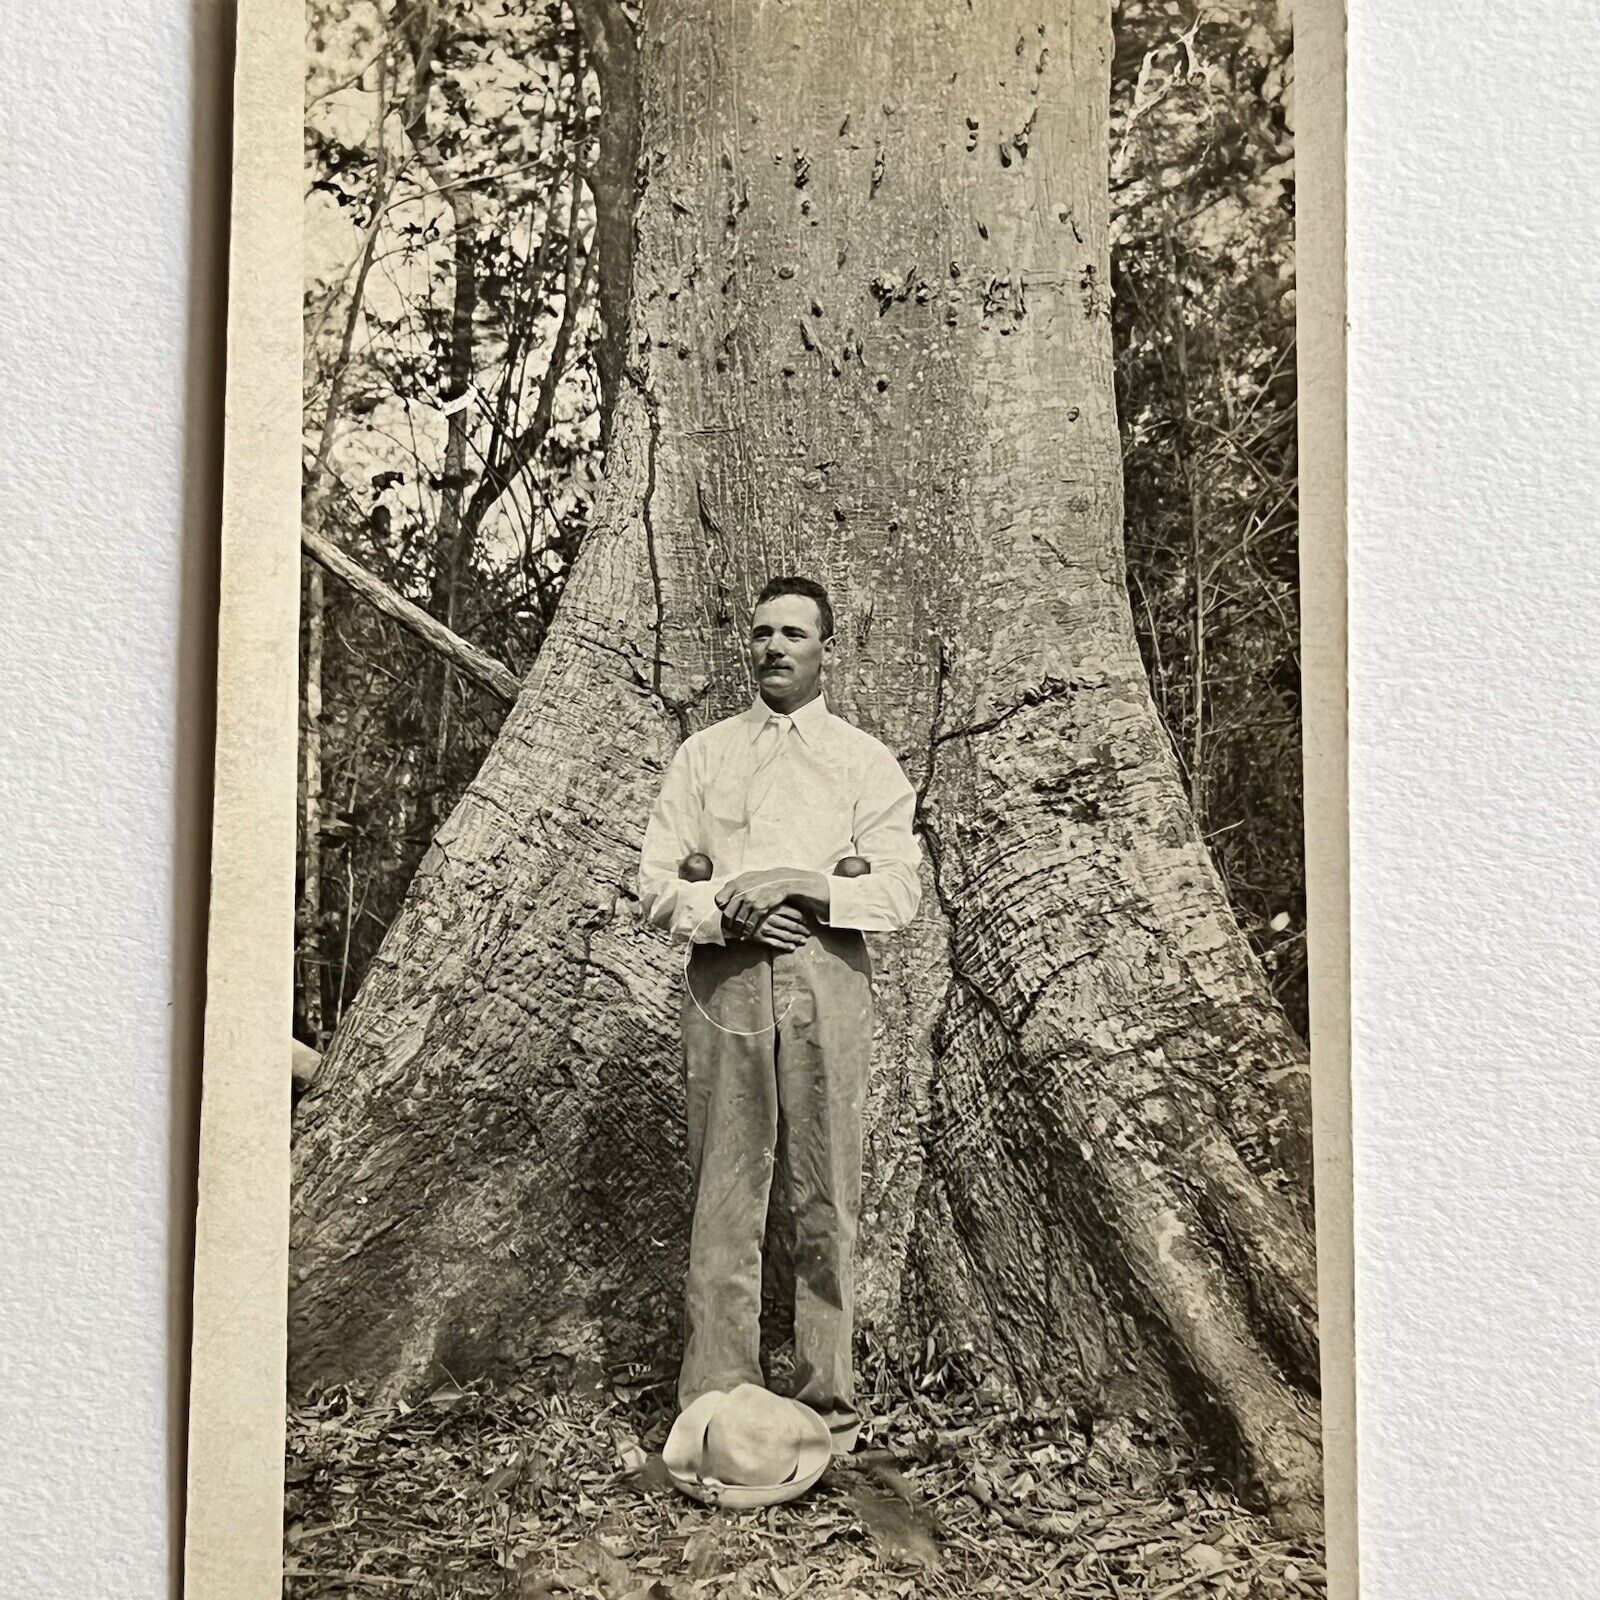 Antique RPPC Real Photograph Postcard Handsome Young Man Apples Big Tree Odd